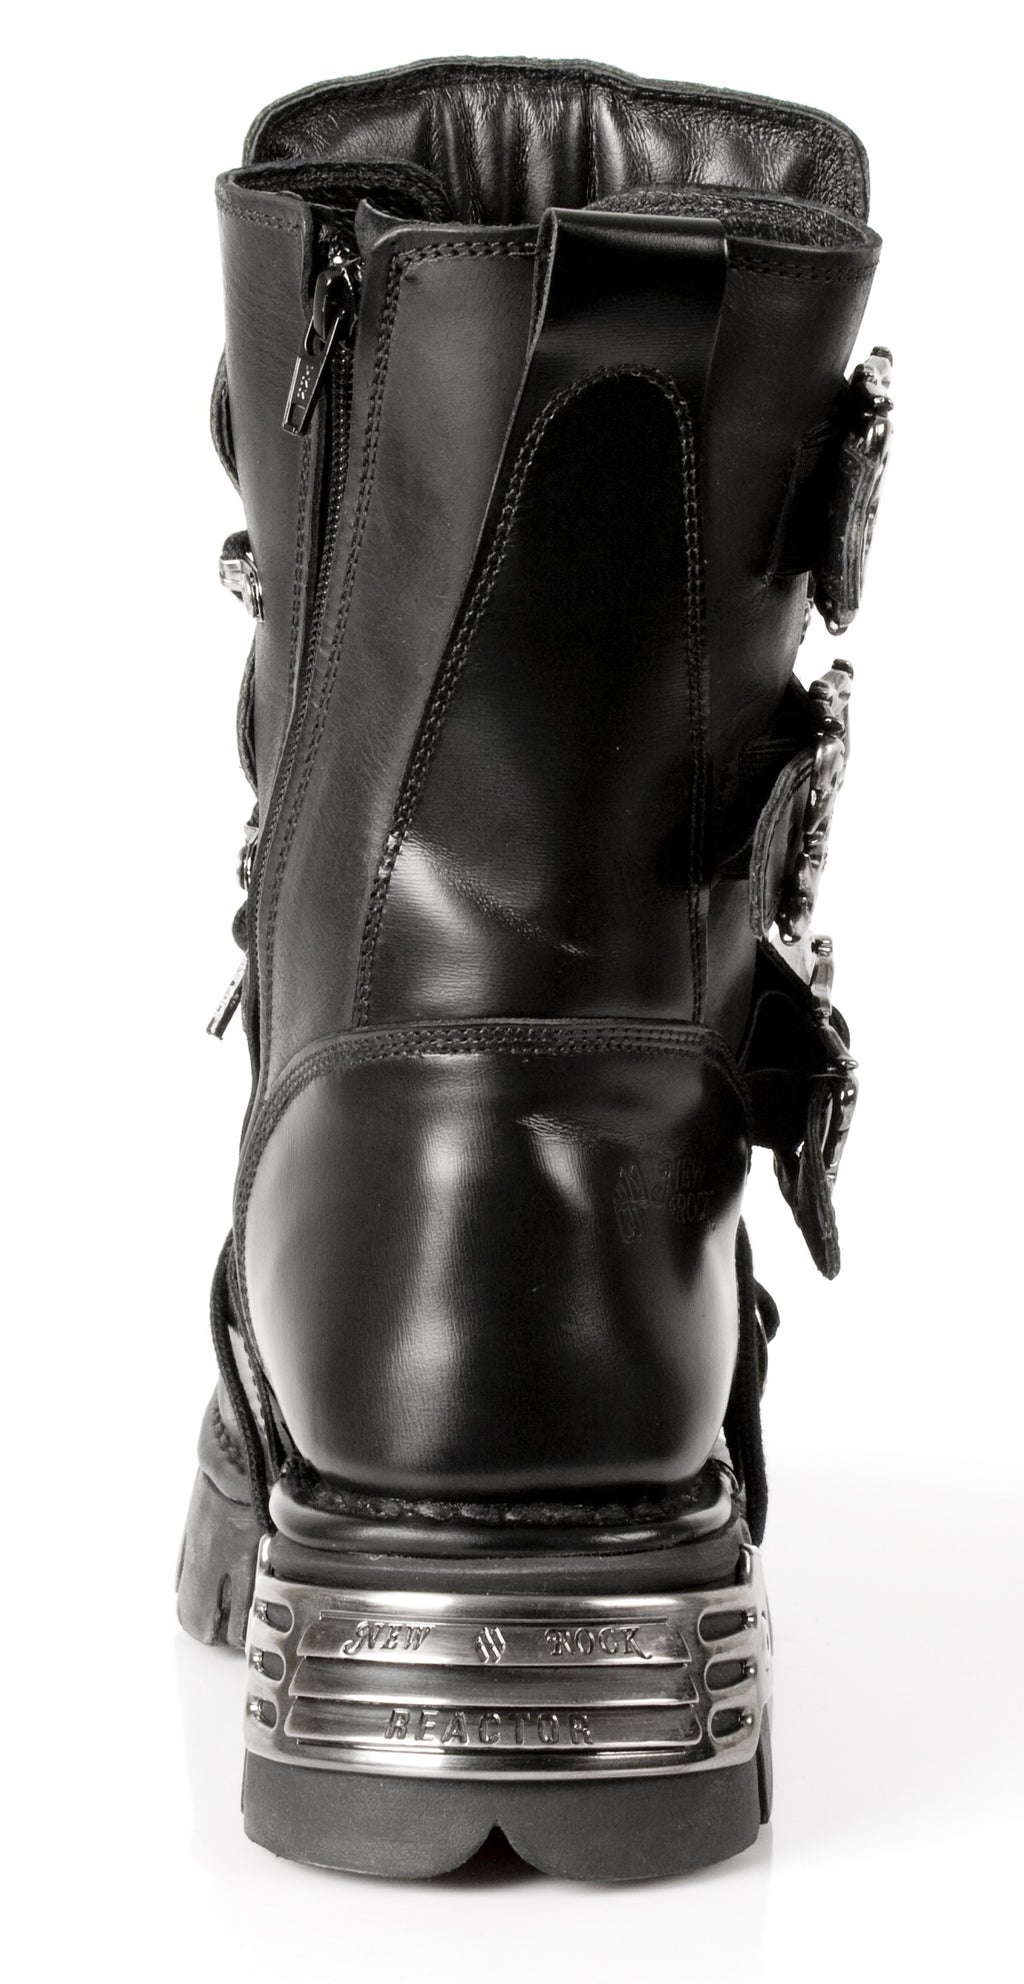 NEW ROCK - M-391-S1 Black SkullBuckled Lace Up Boots